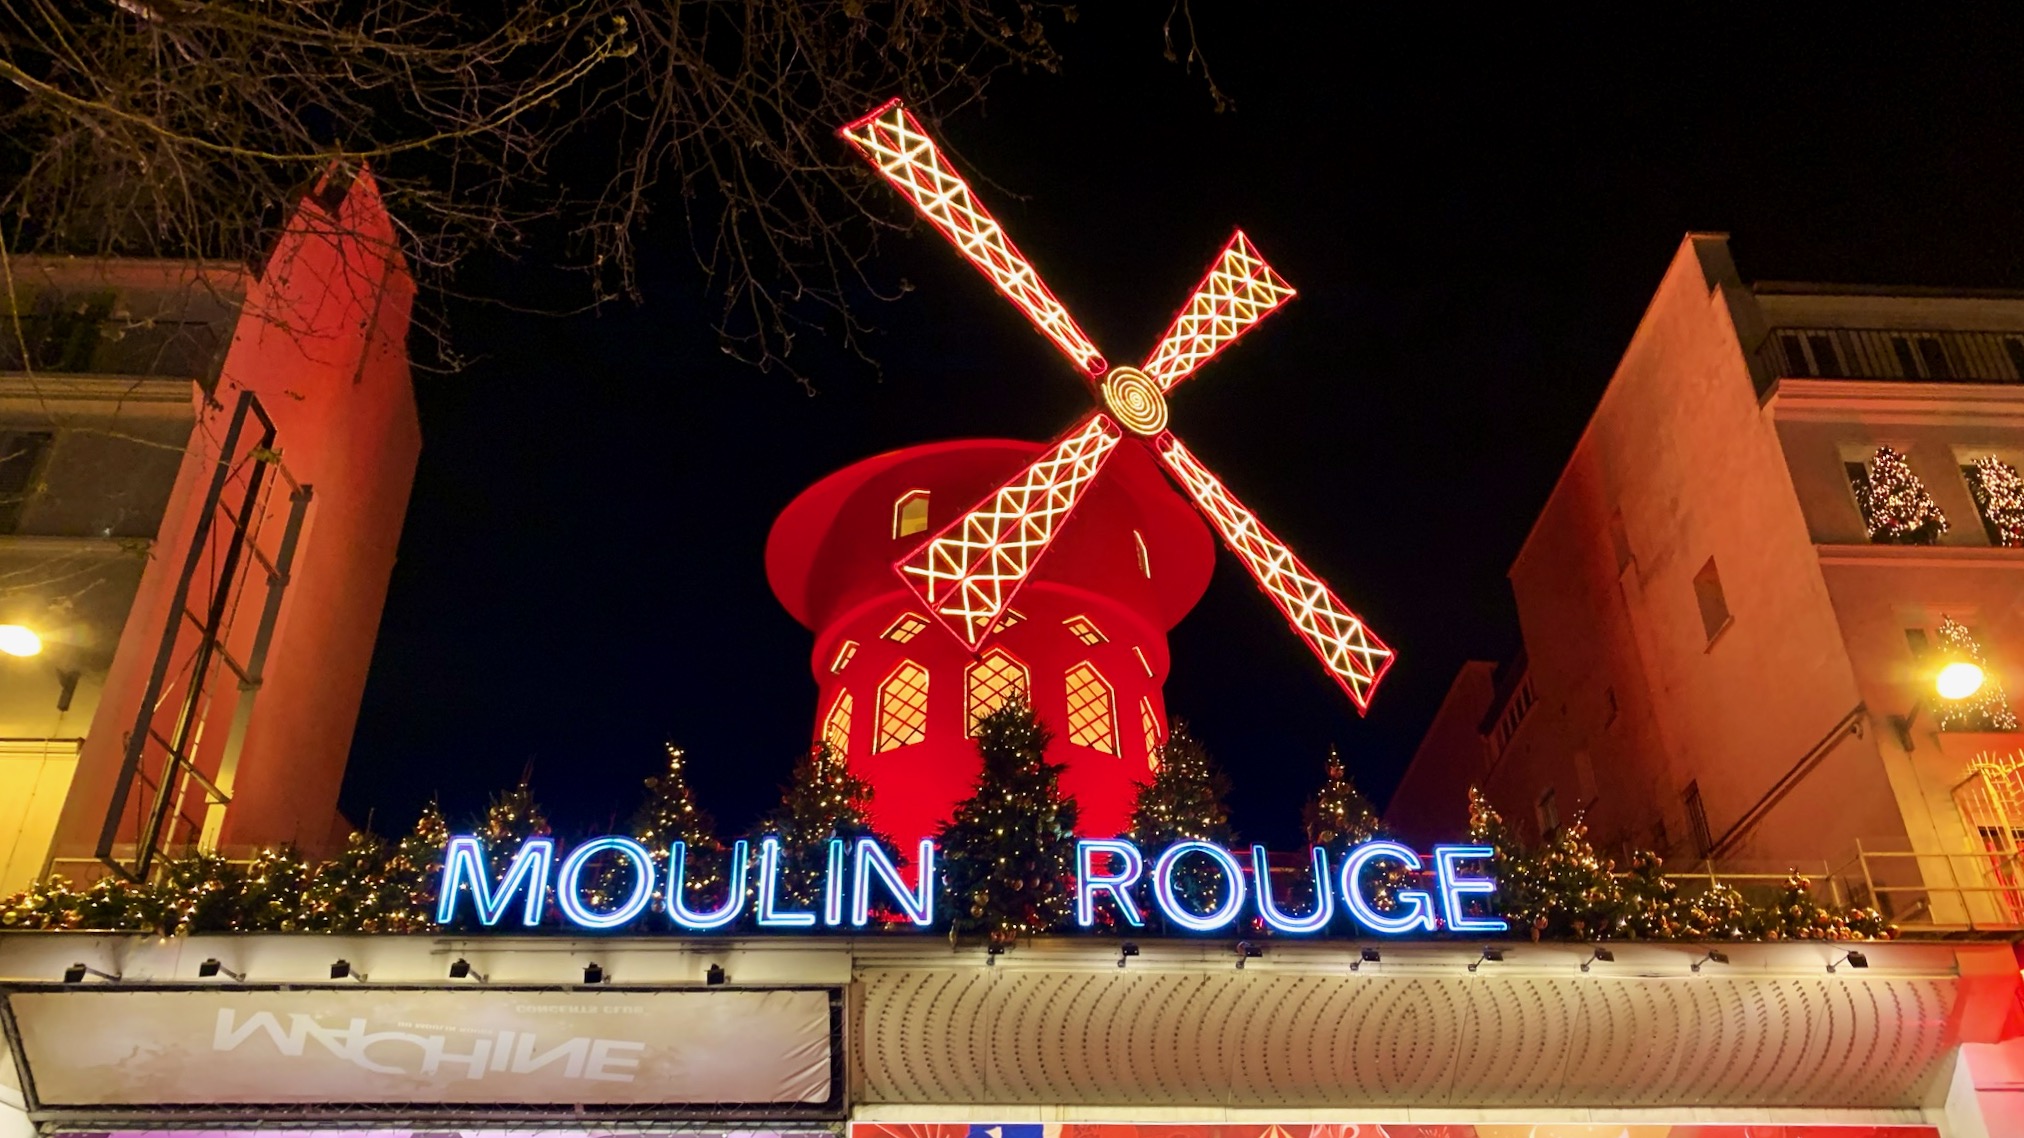 the red windmill and moulin rouge sign in paris